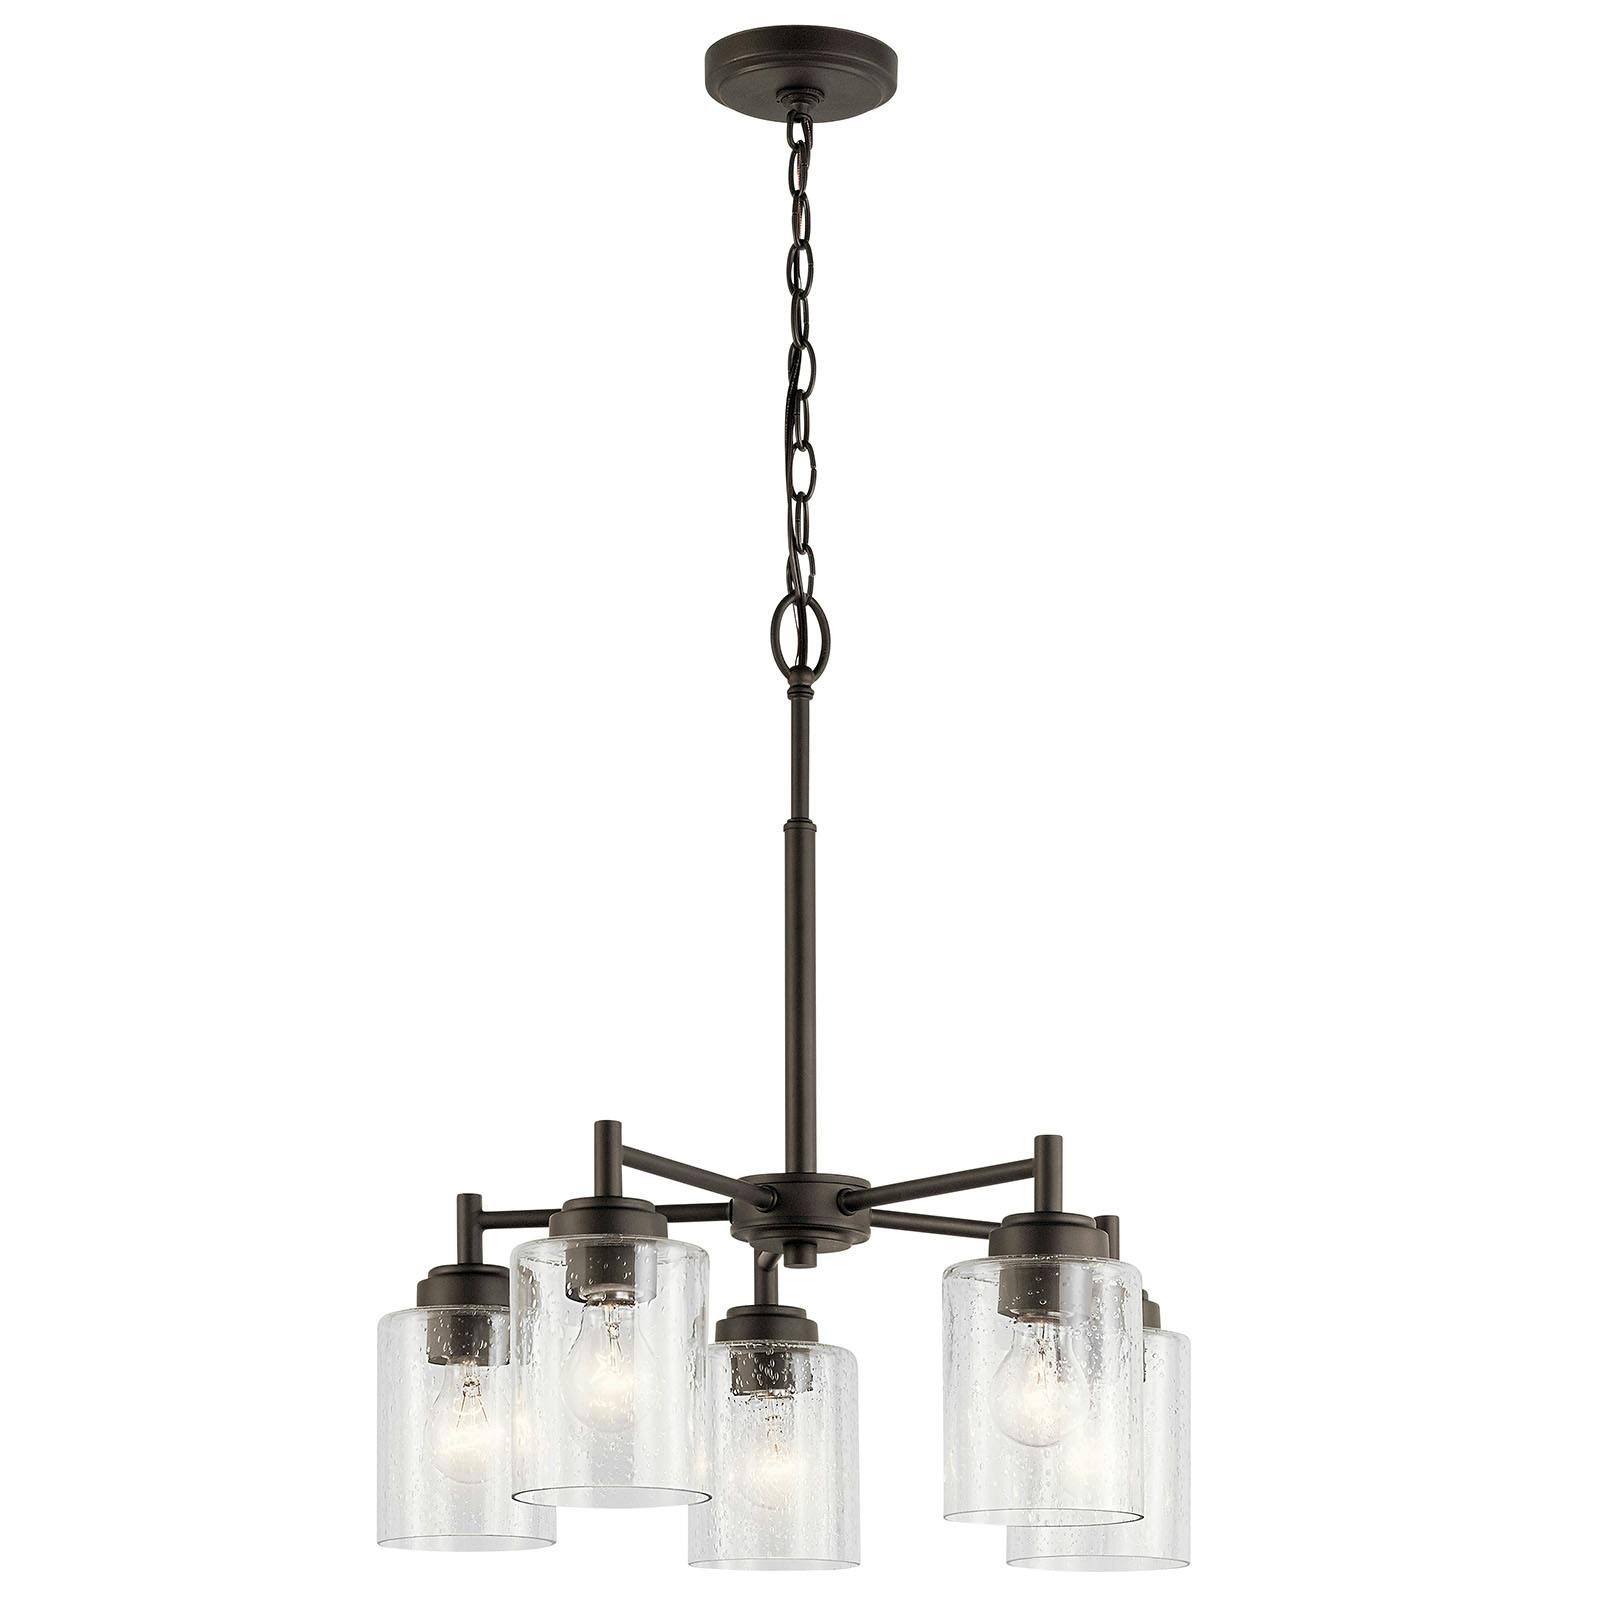 The Winslow 19.75" Chandelier Olde Bronze facing down on a white background